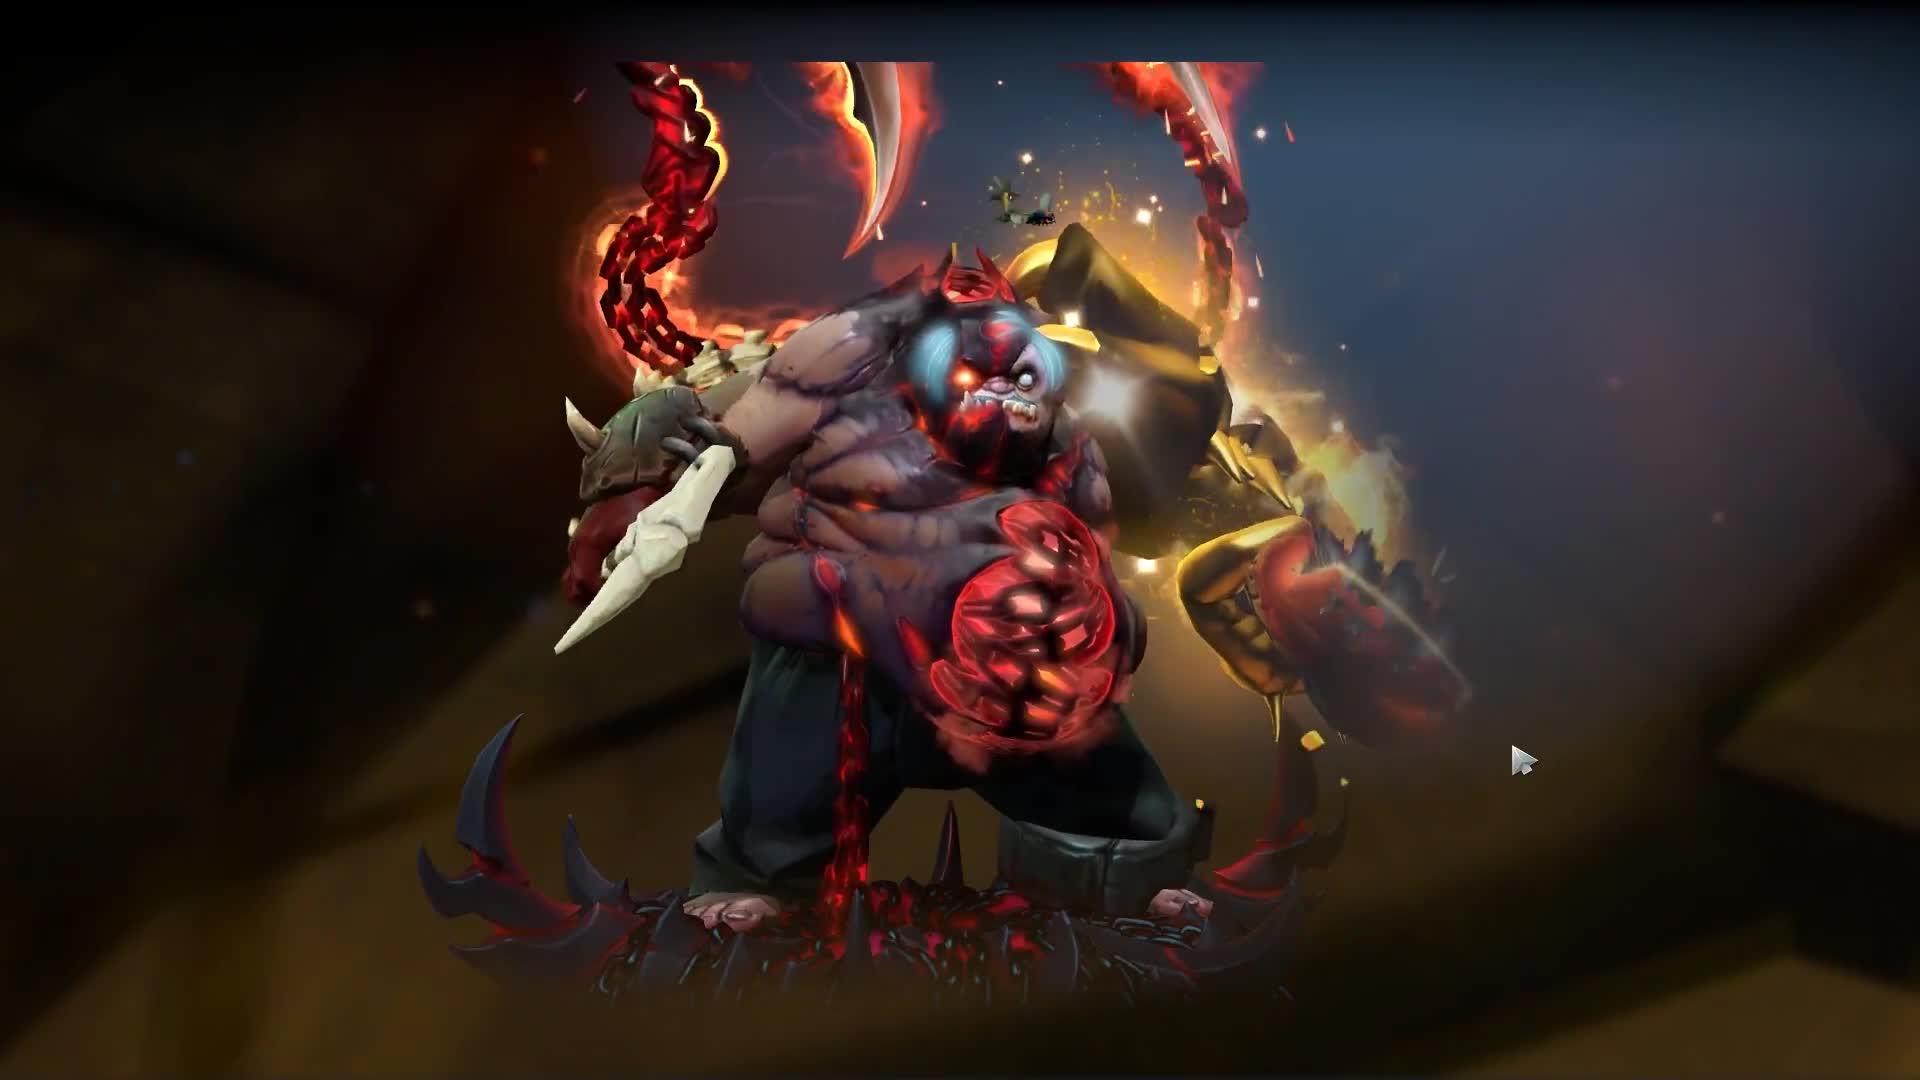 DOTA 2 PUDGE THE MOST EXPENSIVE SET WITH ARCANA The Feast